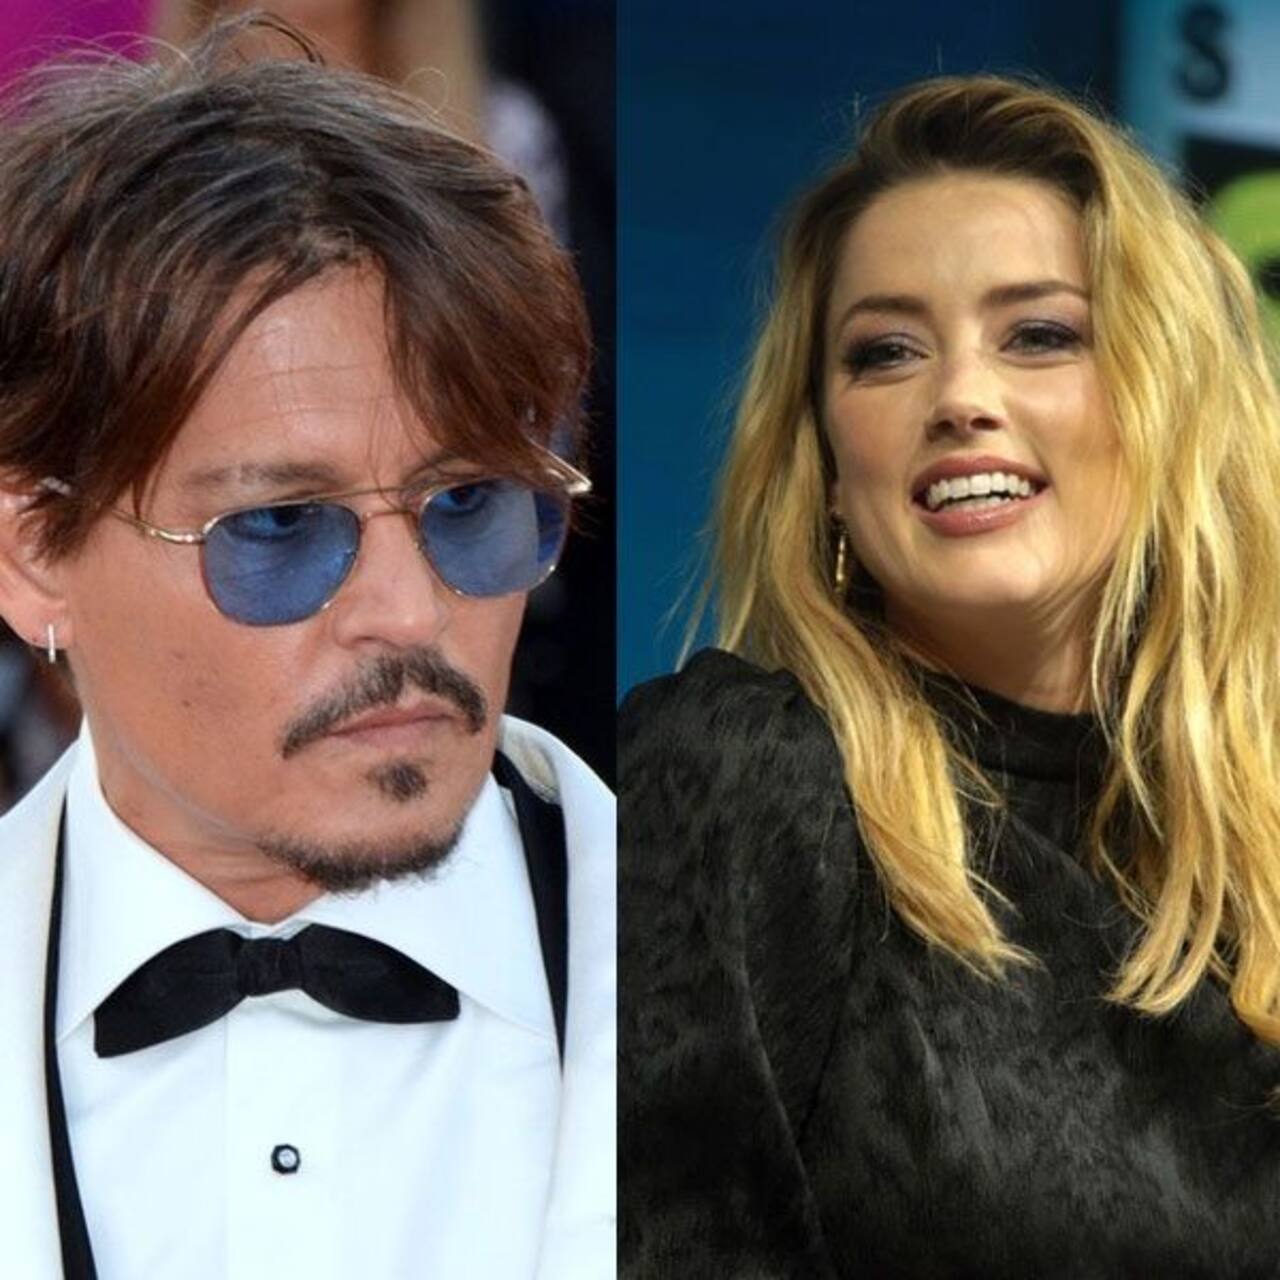 Concluding statements update and more deets on Johnny Depp-Amber Heard trial